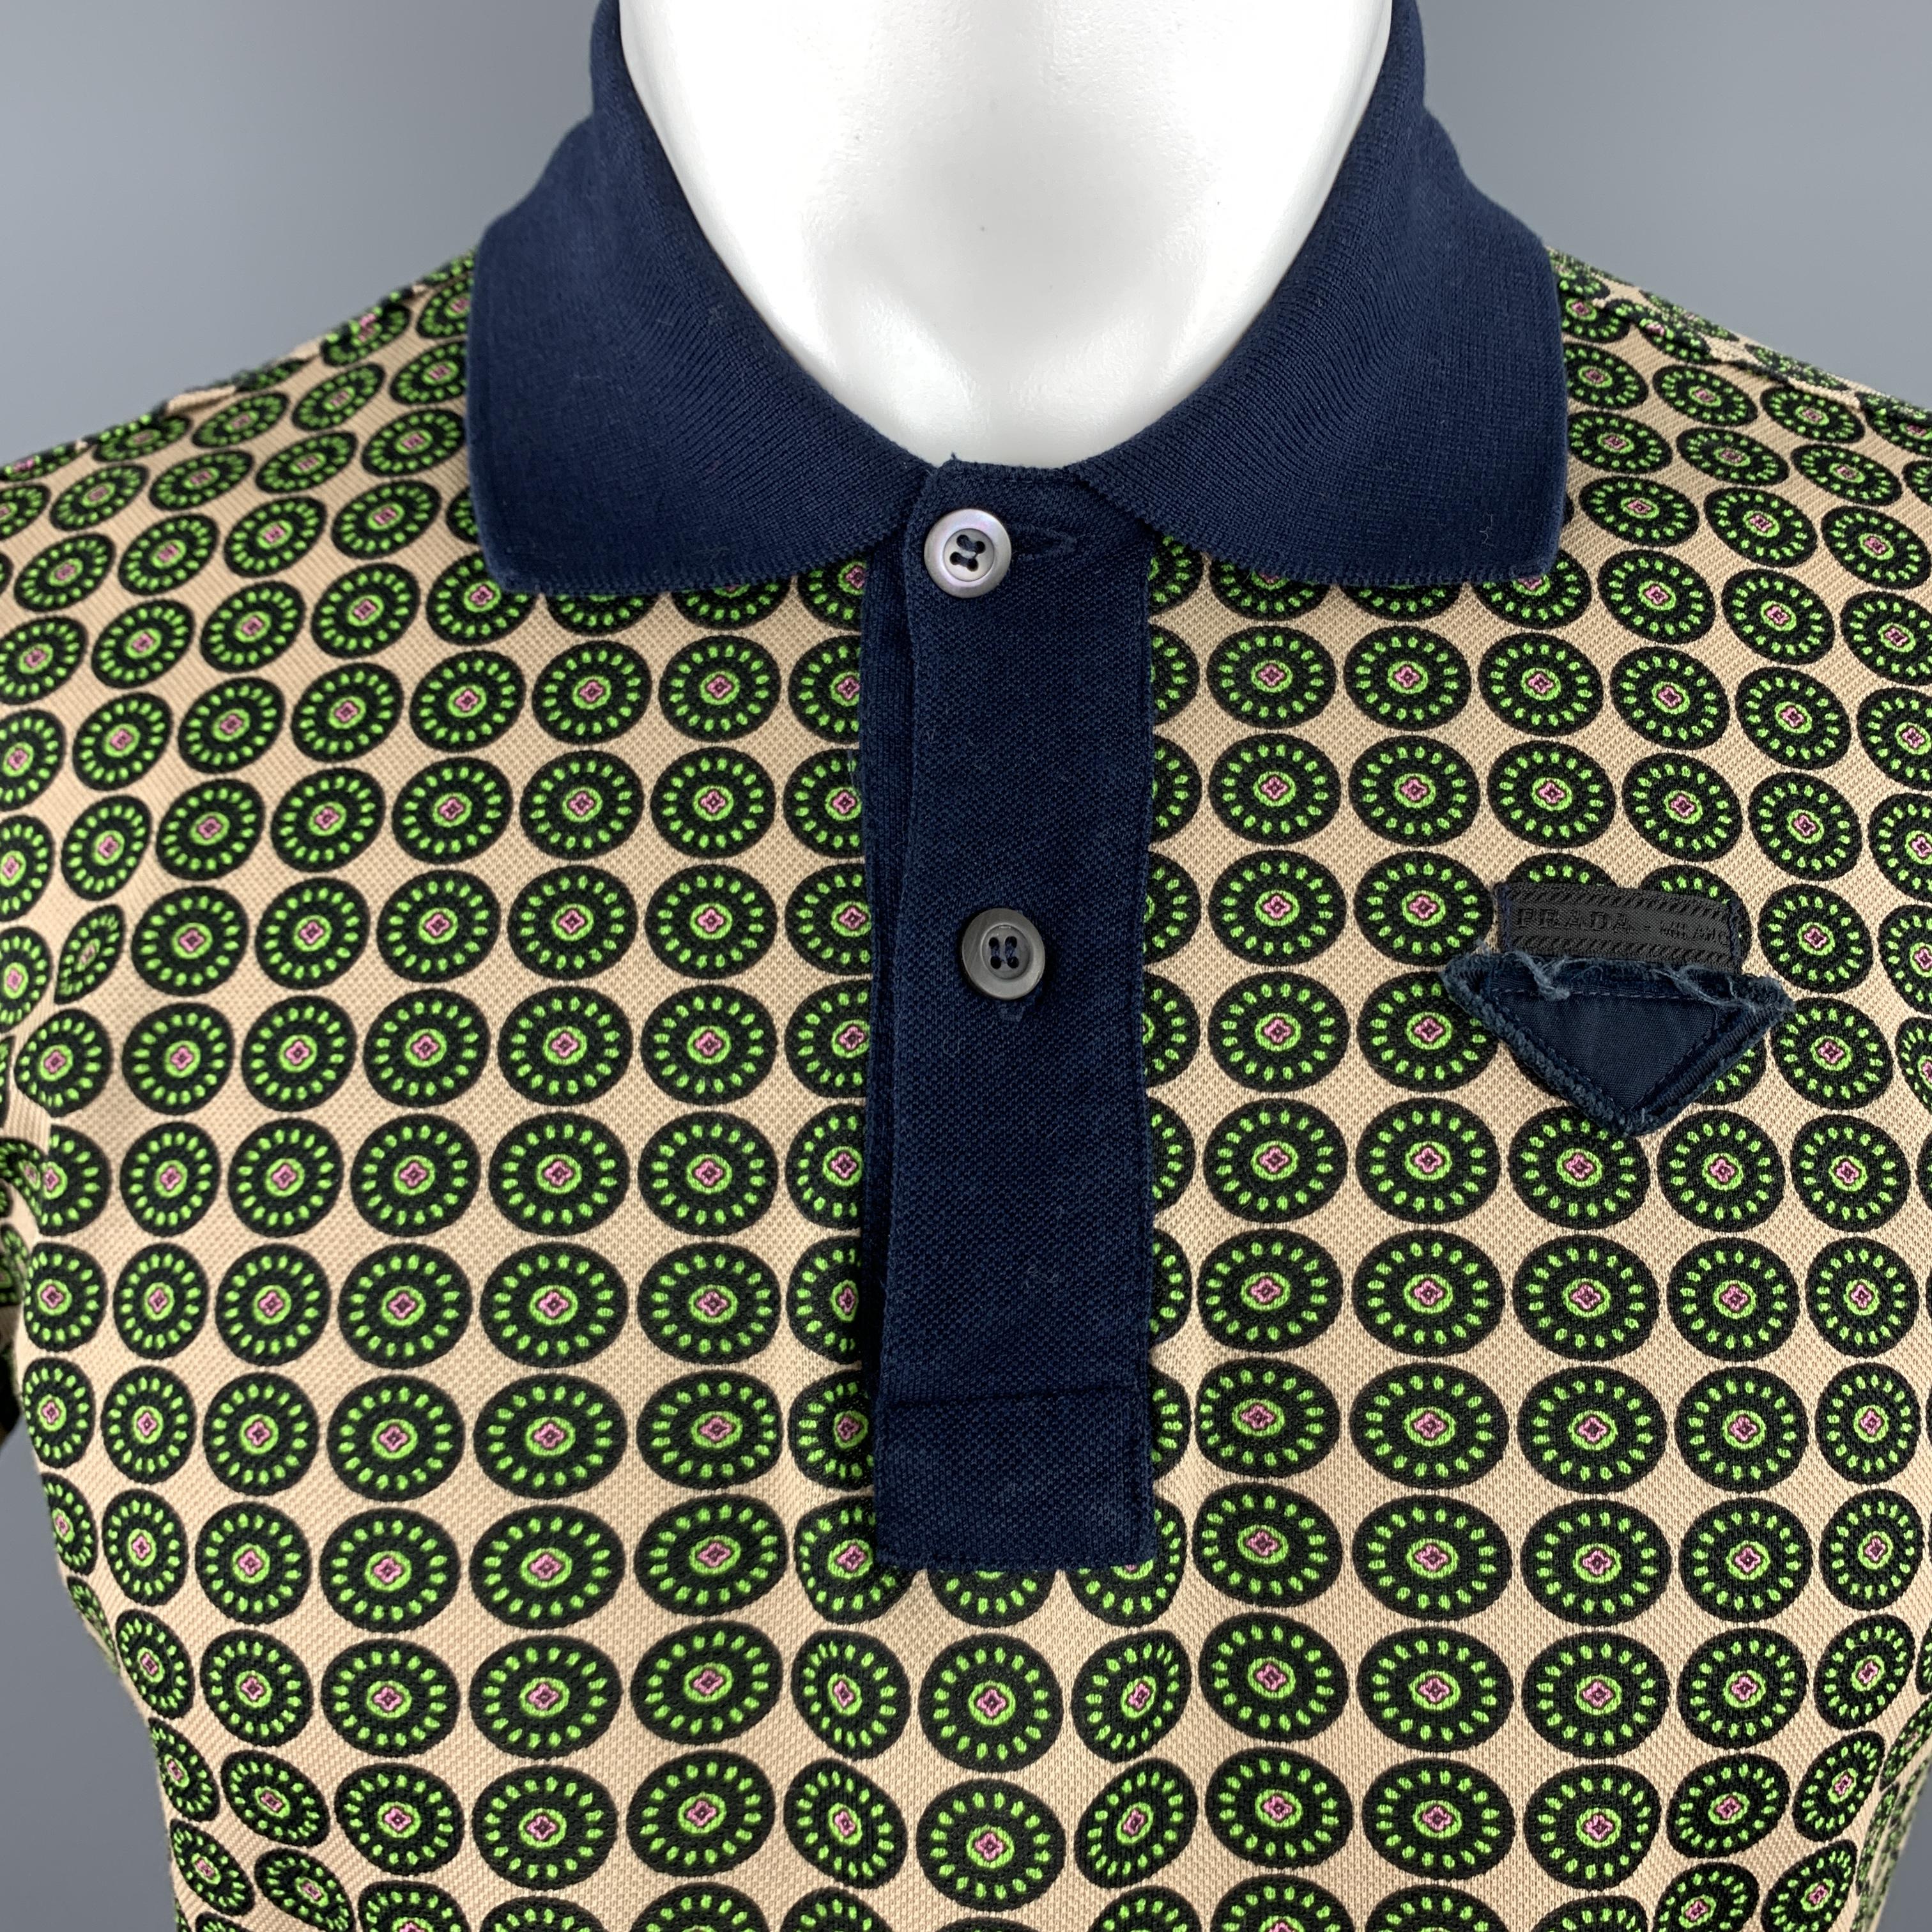 PRADA polo shirt comes in beige cotton pique with an al over black and green retro print, navy collar, and triangle logo patch.

Excellent Pre-Owned Condition.
Marked: M

Measurements:

Shoulder: 18 in.
Chest: 44 in.
Sleeve: 7 in.
Length: 23.5 in.